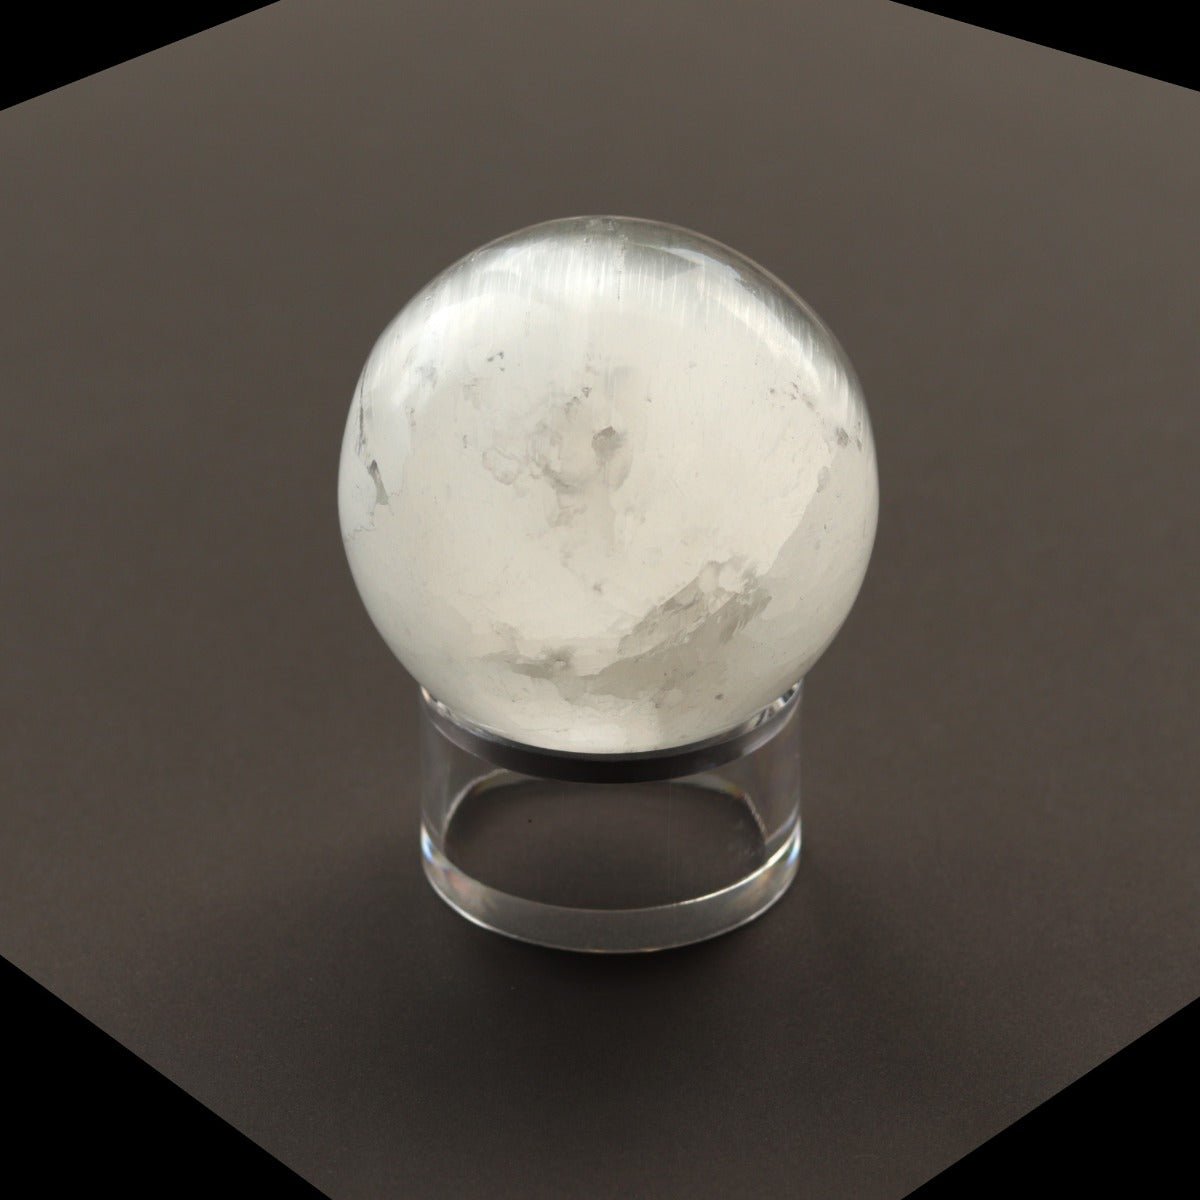 2.5 to 3.25 inch Selenite Crystal Ball - 13 Moons